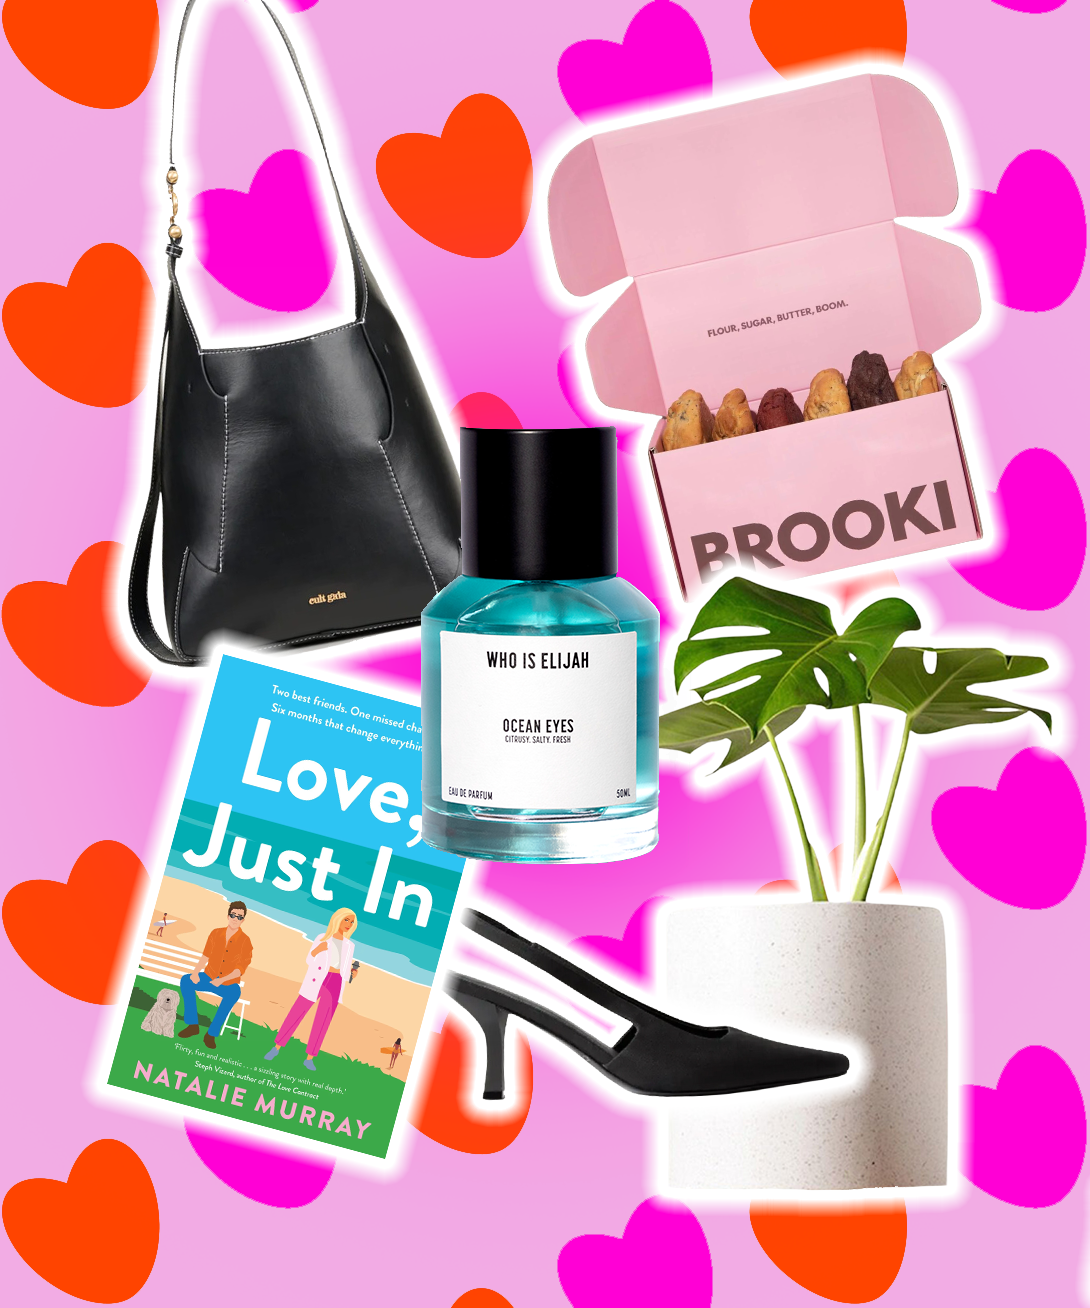 Our creative Valentine's day gift ideas - Four Generations One Roof Blog